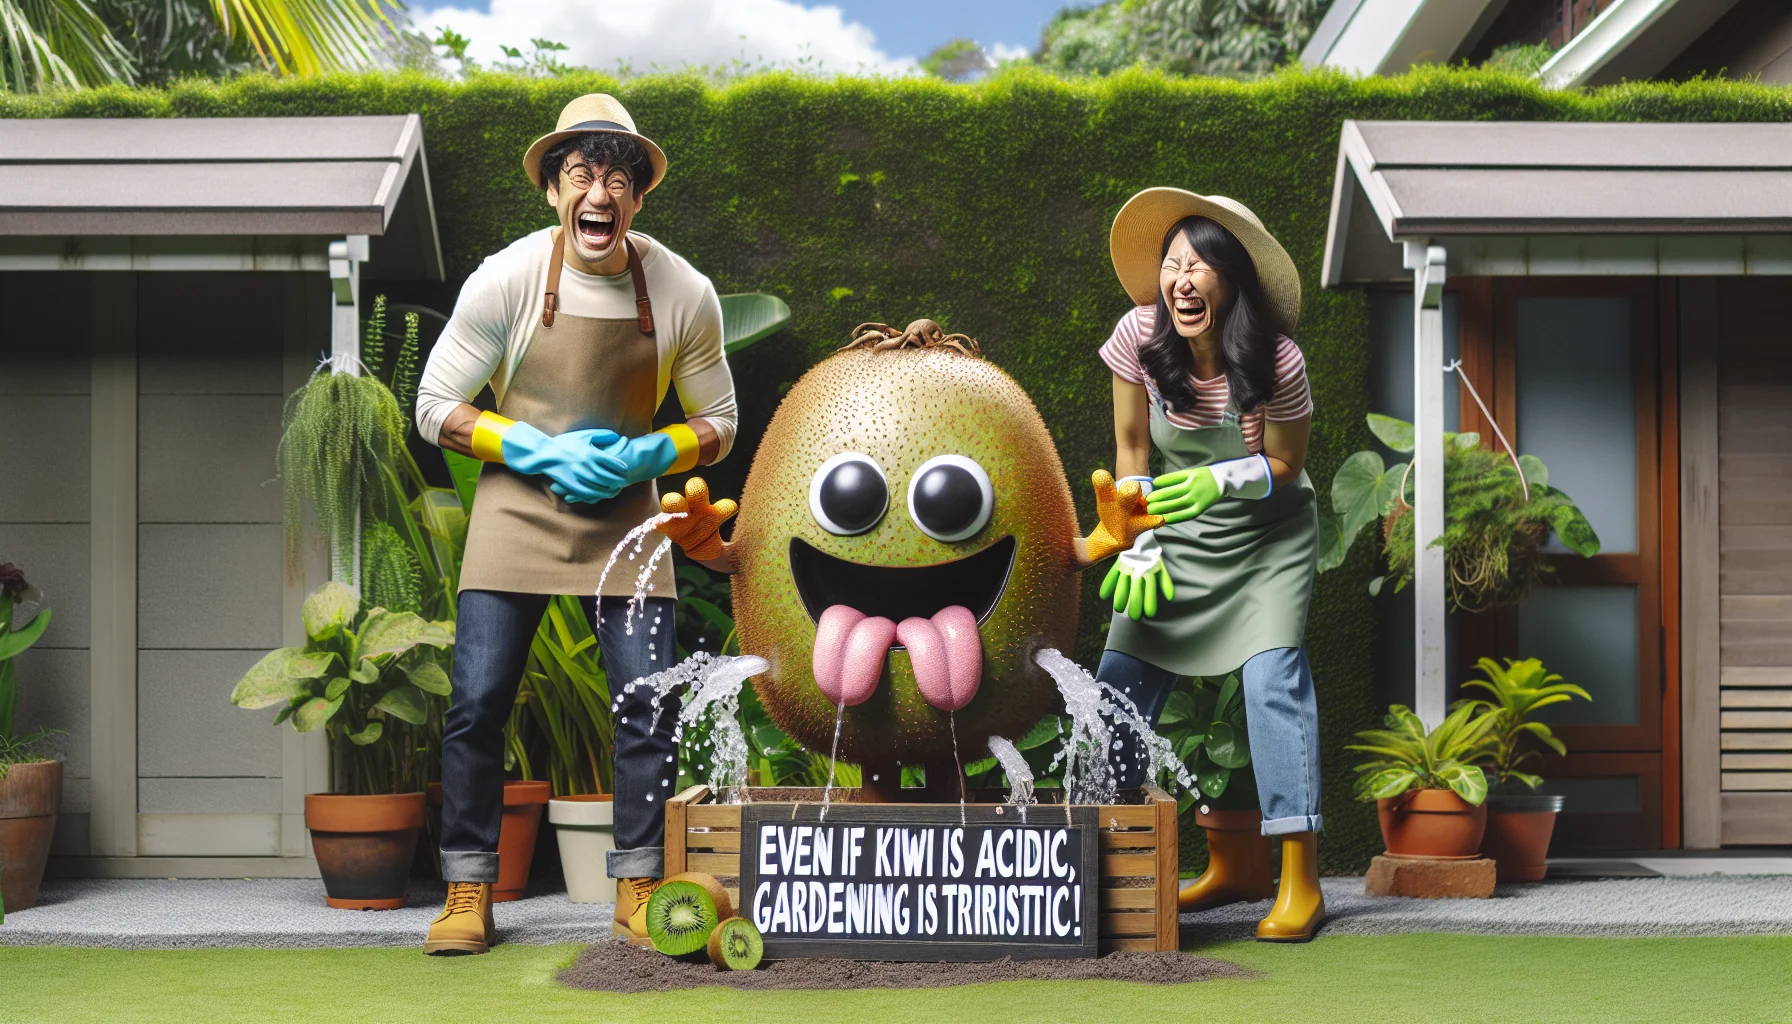 Picture a funny, playful scenario in a lush home garden. A South Asian man and a Hispanic woman, both wearing gardening hats and gloves, laugh as they deal with a very animated, oversized kiwi fruit. The kiwi fruit cheekily sprouts rubbery arms and legs and squirts little droplets of juice in the air, which fizzle and steam getting close to the plants, indicating its acidic nature. The scene still conveys the joy of gardening and includes a decorative sign that reads, 'Even if kiwi is acidic, gardening is terrific!'